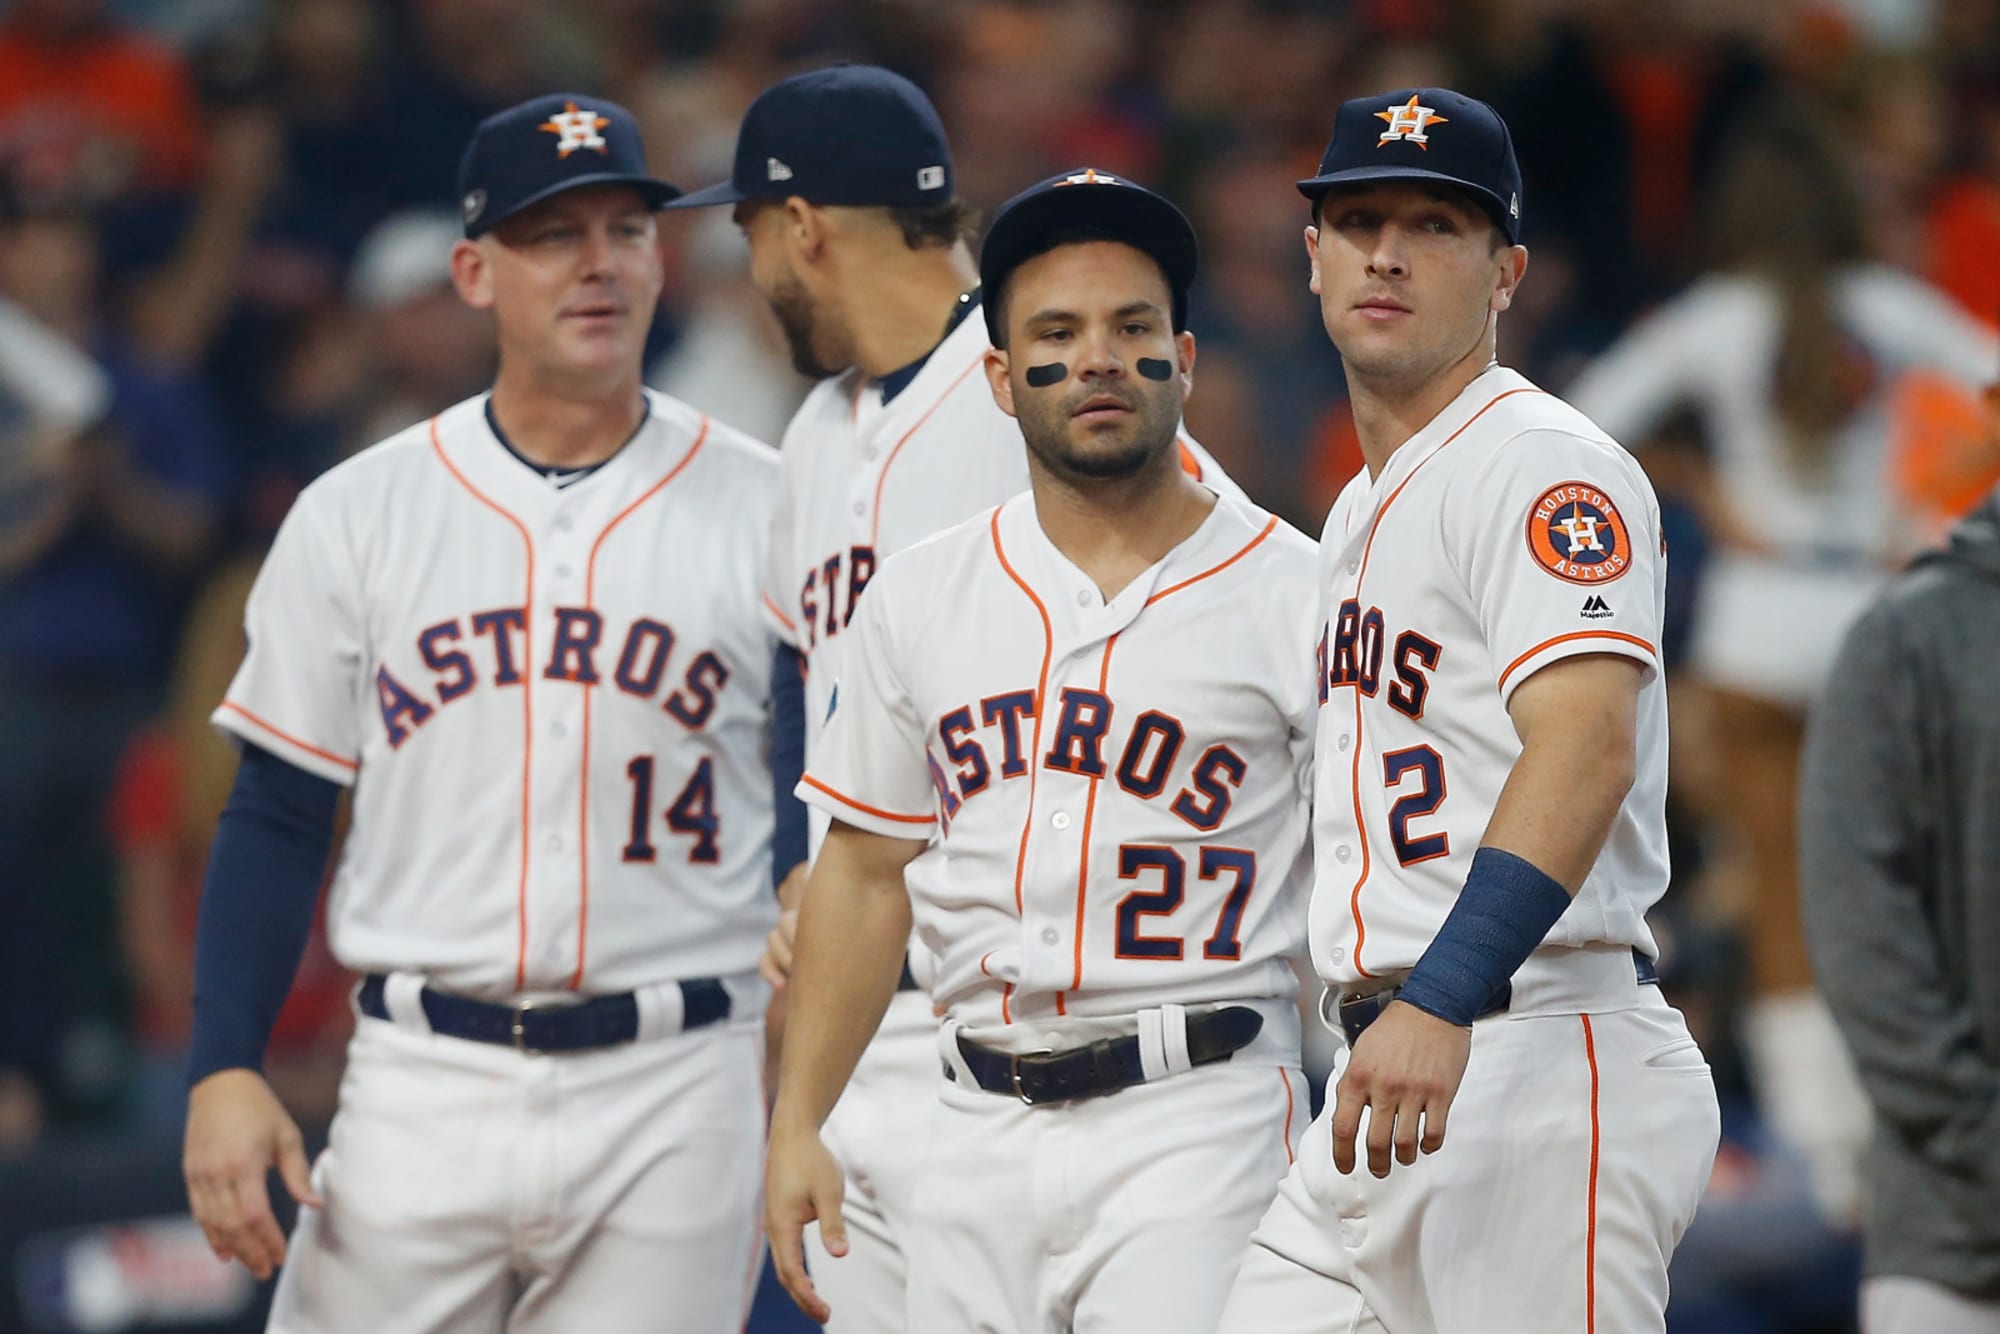 Astros Opening day 25man roster announced for 2019